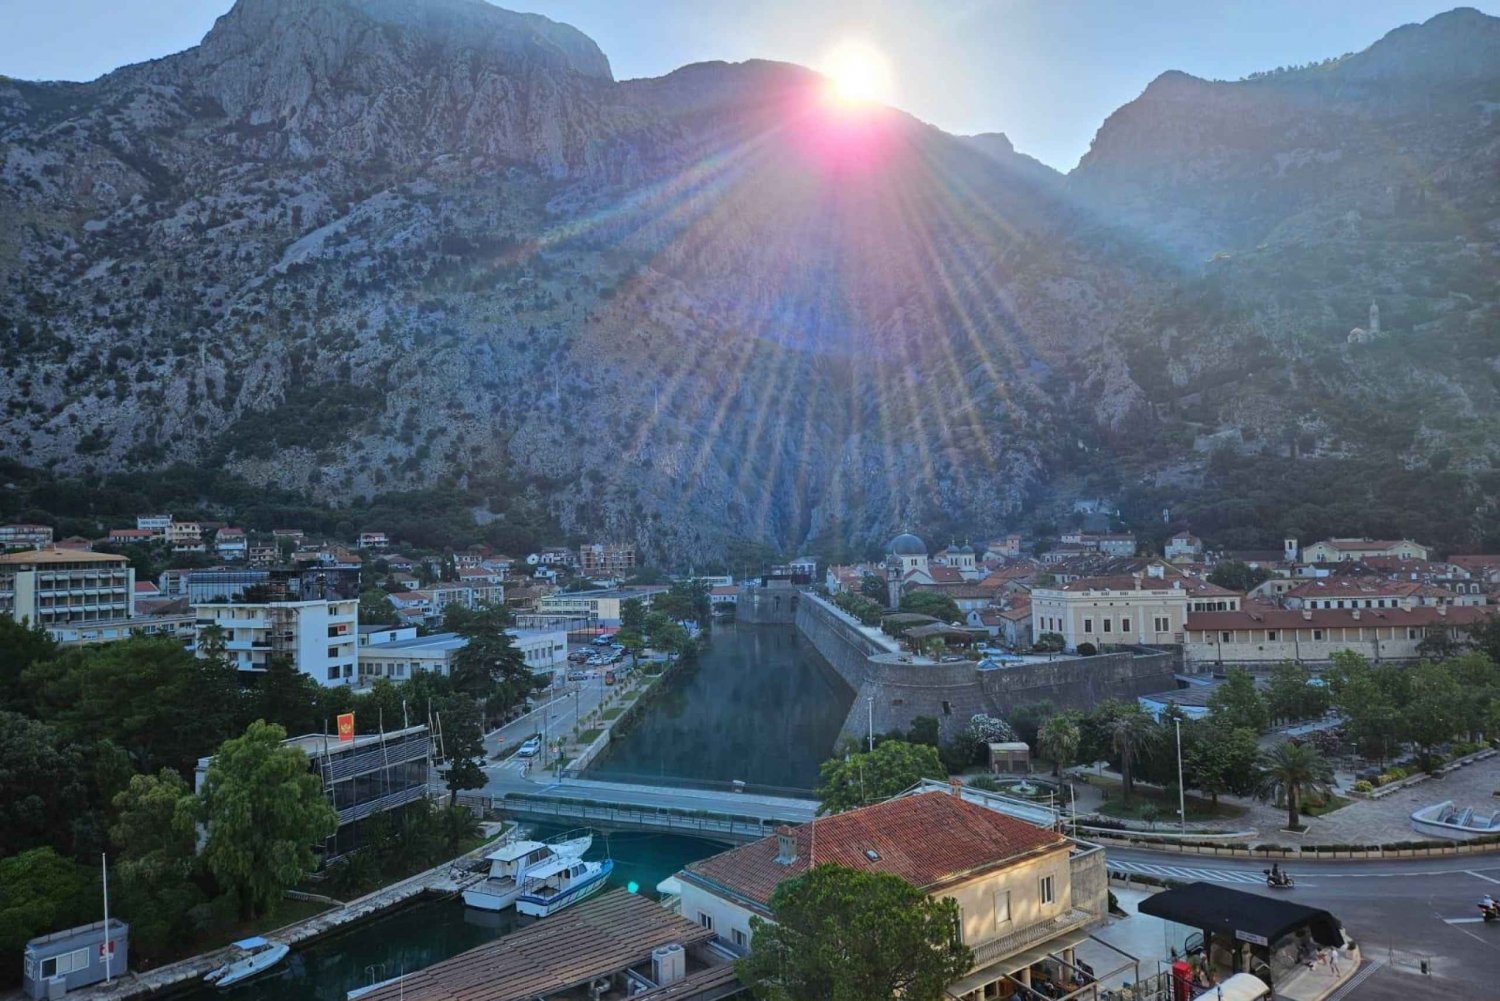 From Kotor: Great Montenegro Full Day Tour